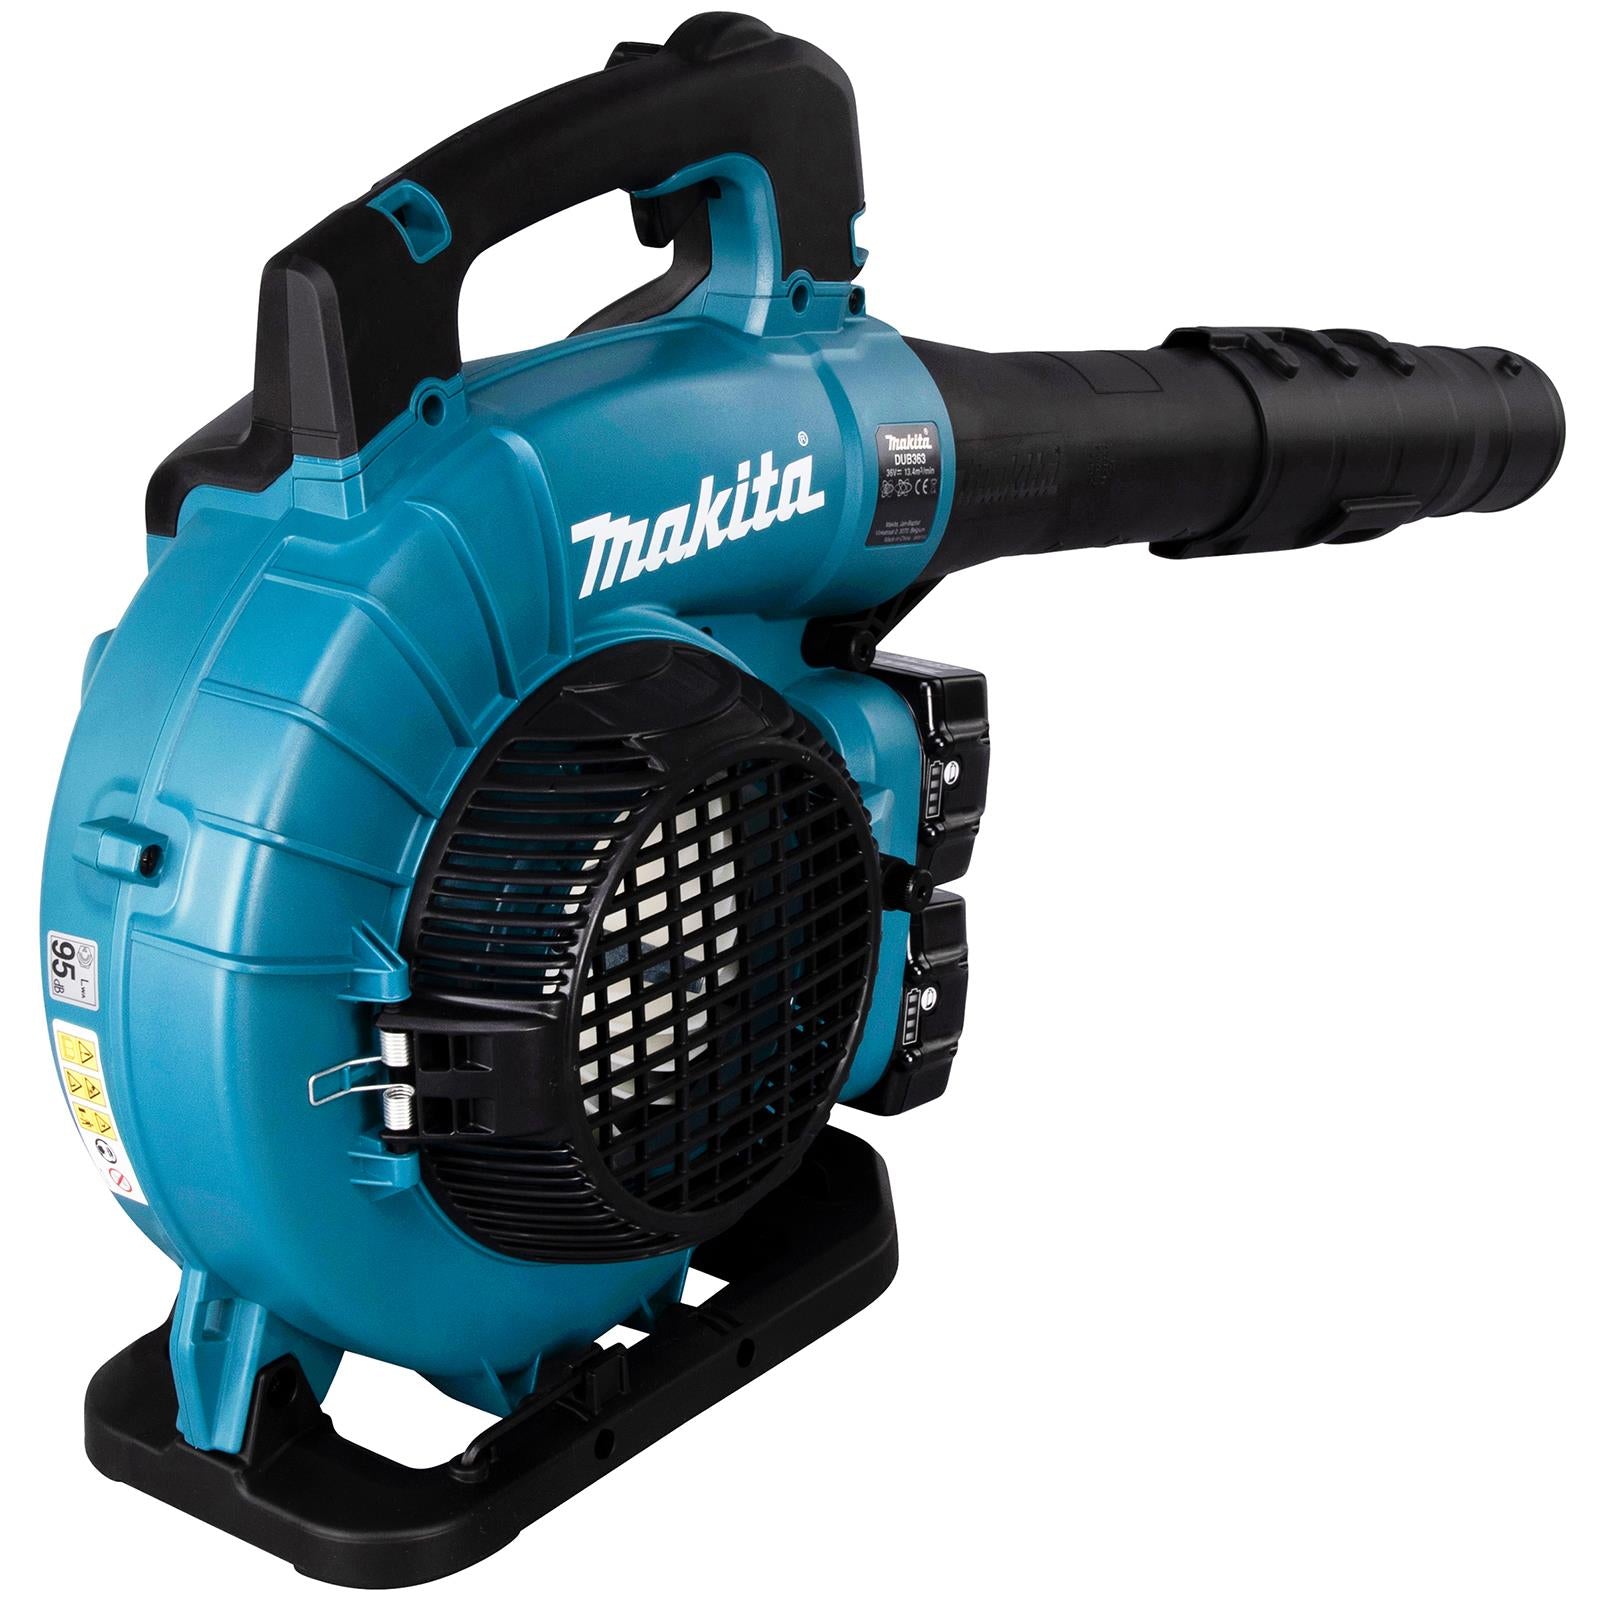 Makita Leaf Blower Vacuum Kit 18V x 2 LXT Brushless Cordless 2 x 5Ah Battery and Dual Rapid Charger 14.4N Garden Grass Clippings Construction DUB363PT2V